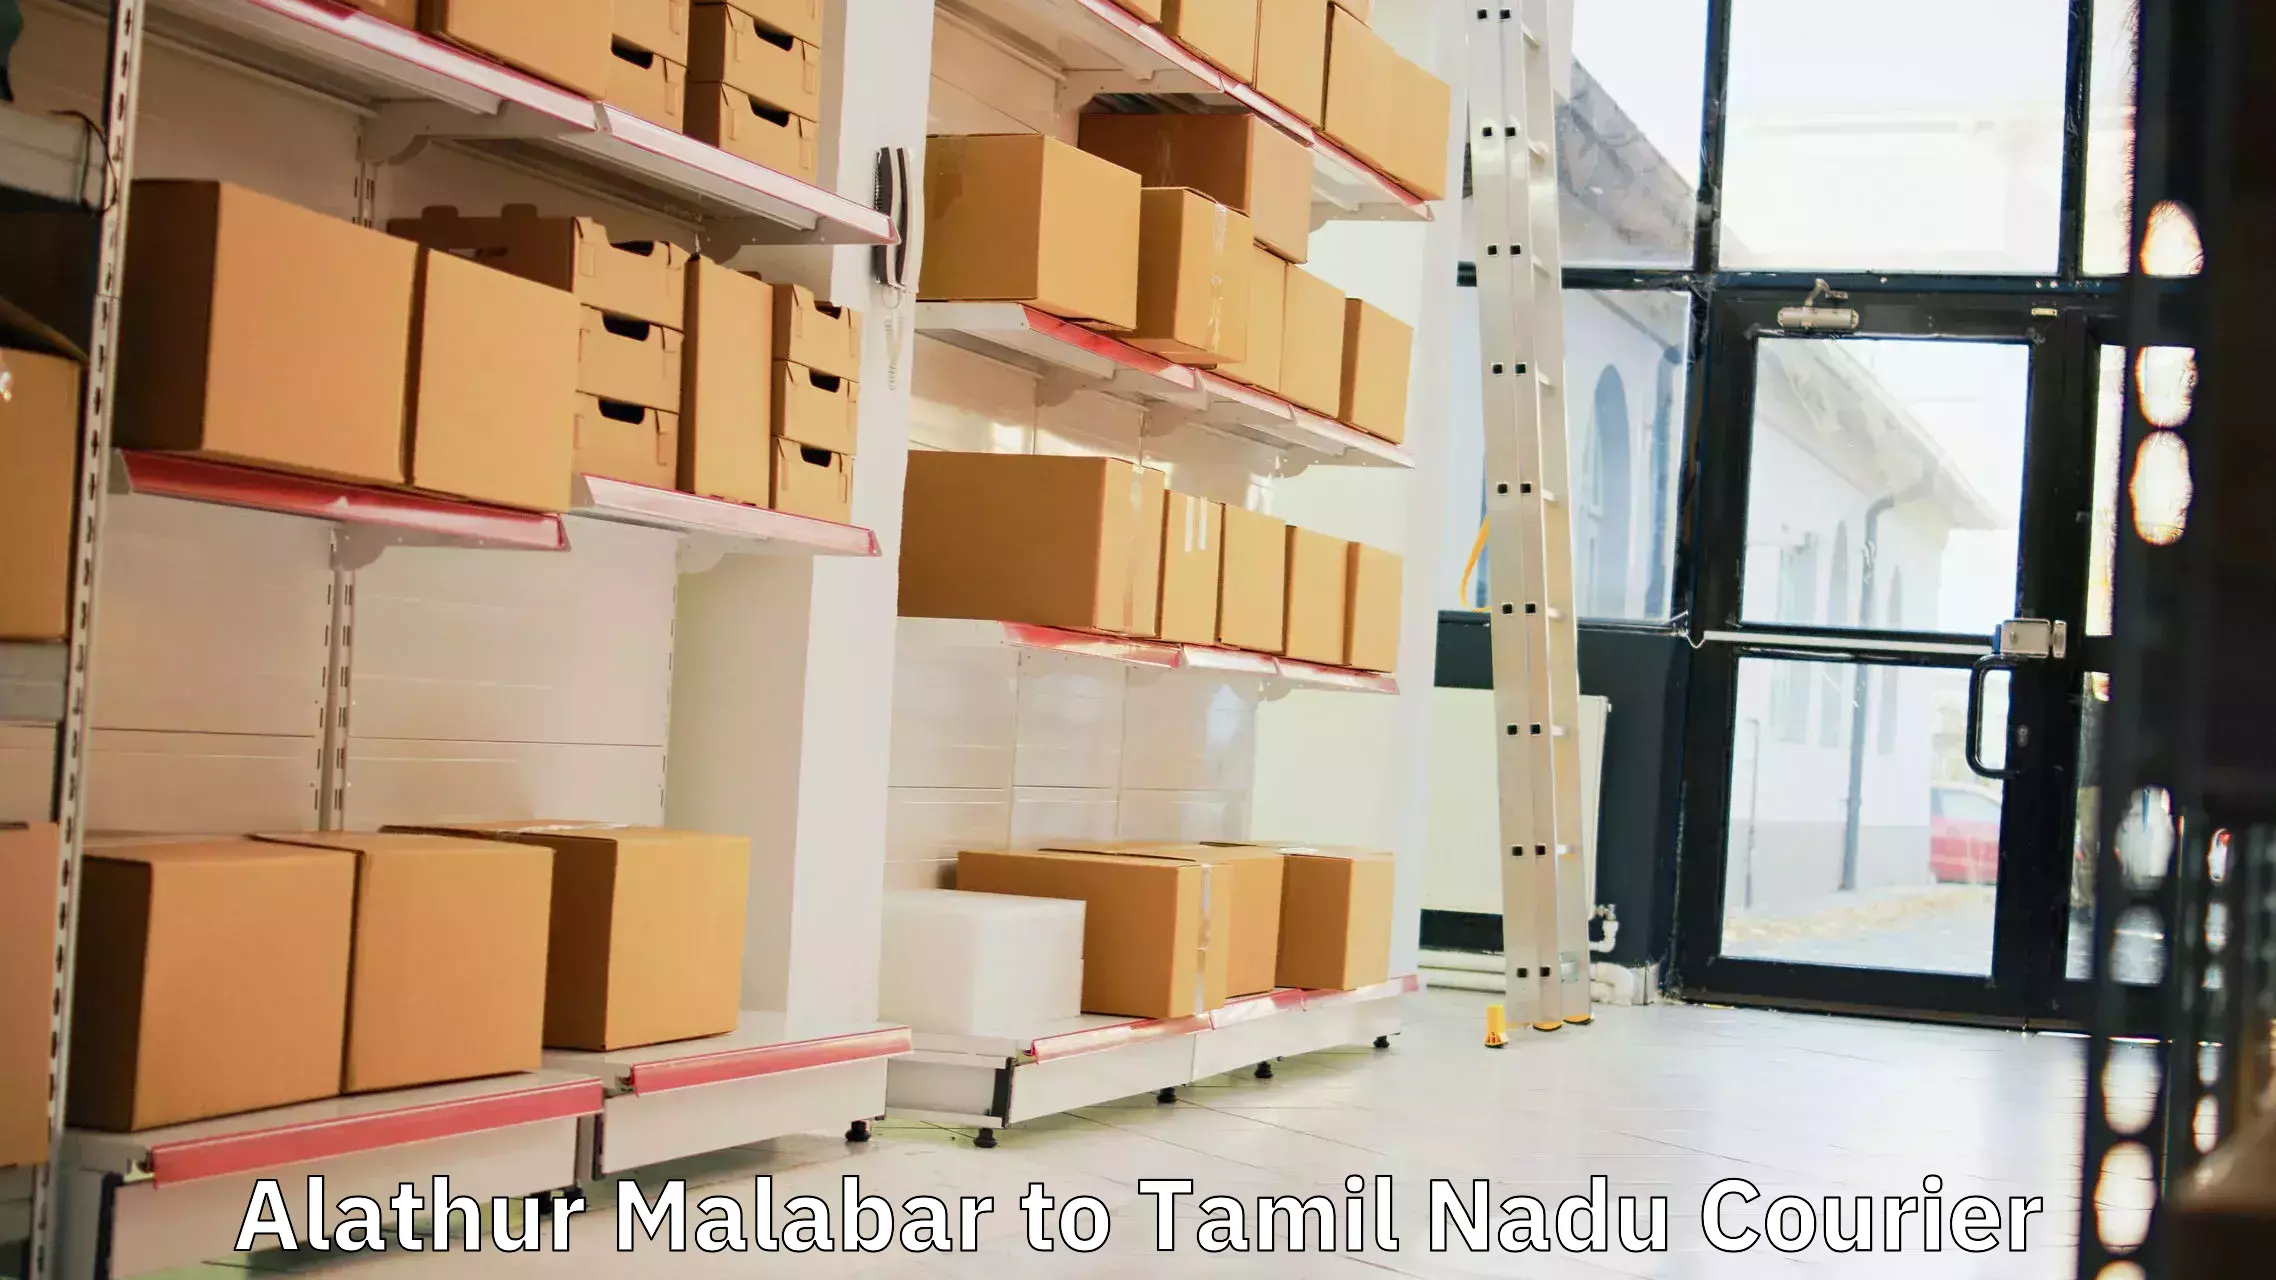 Courier tracking online Alathur Malabar to Cheyyar